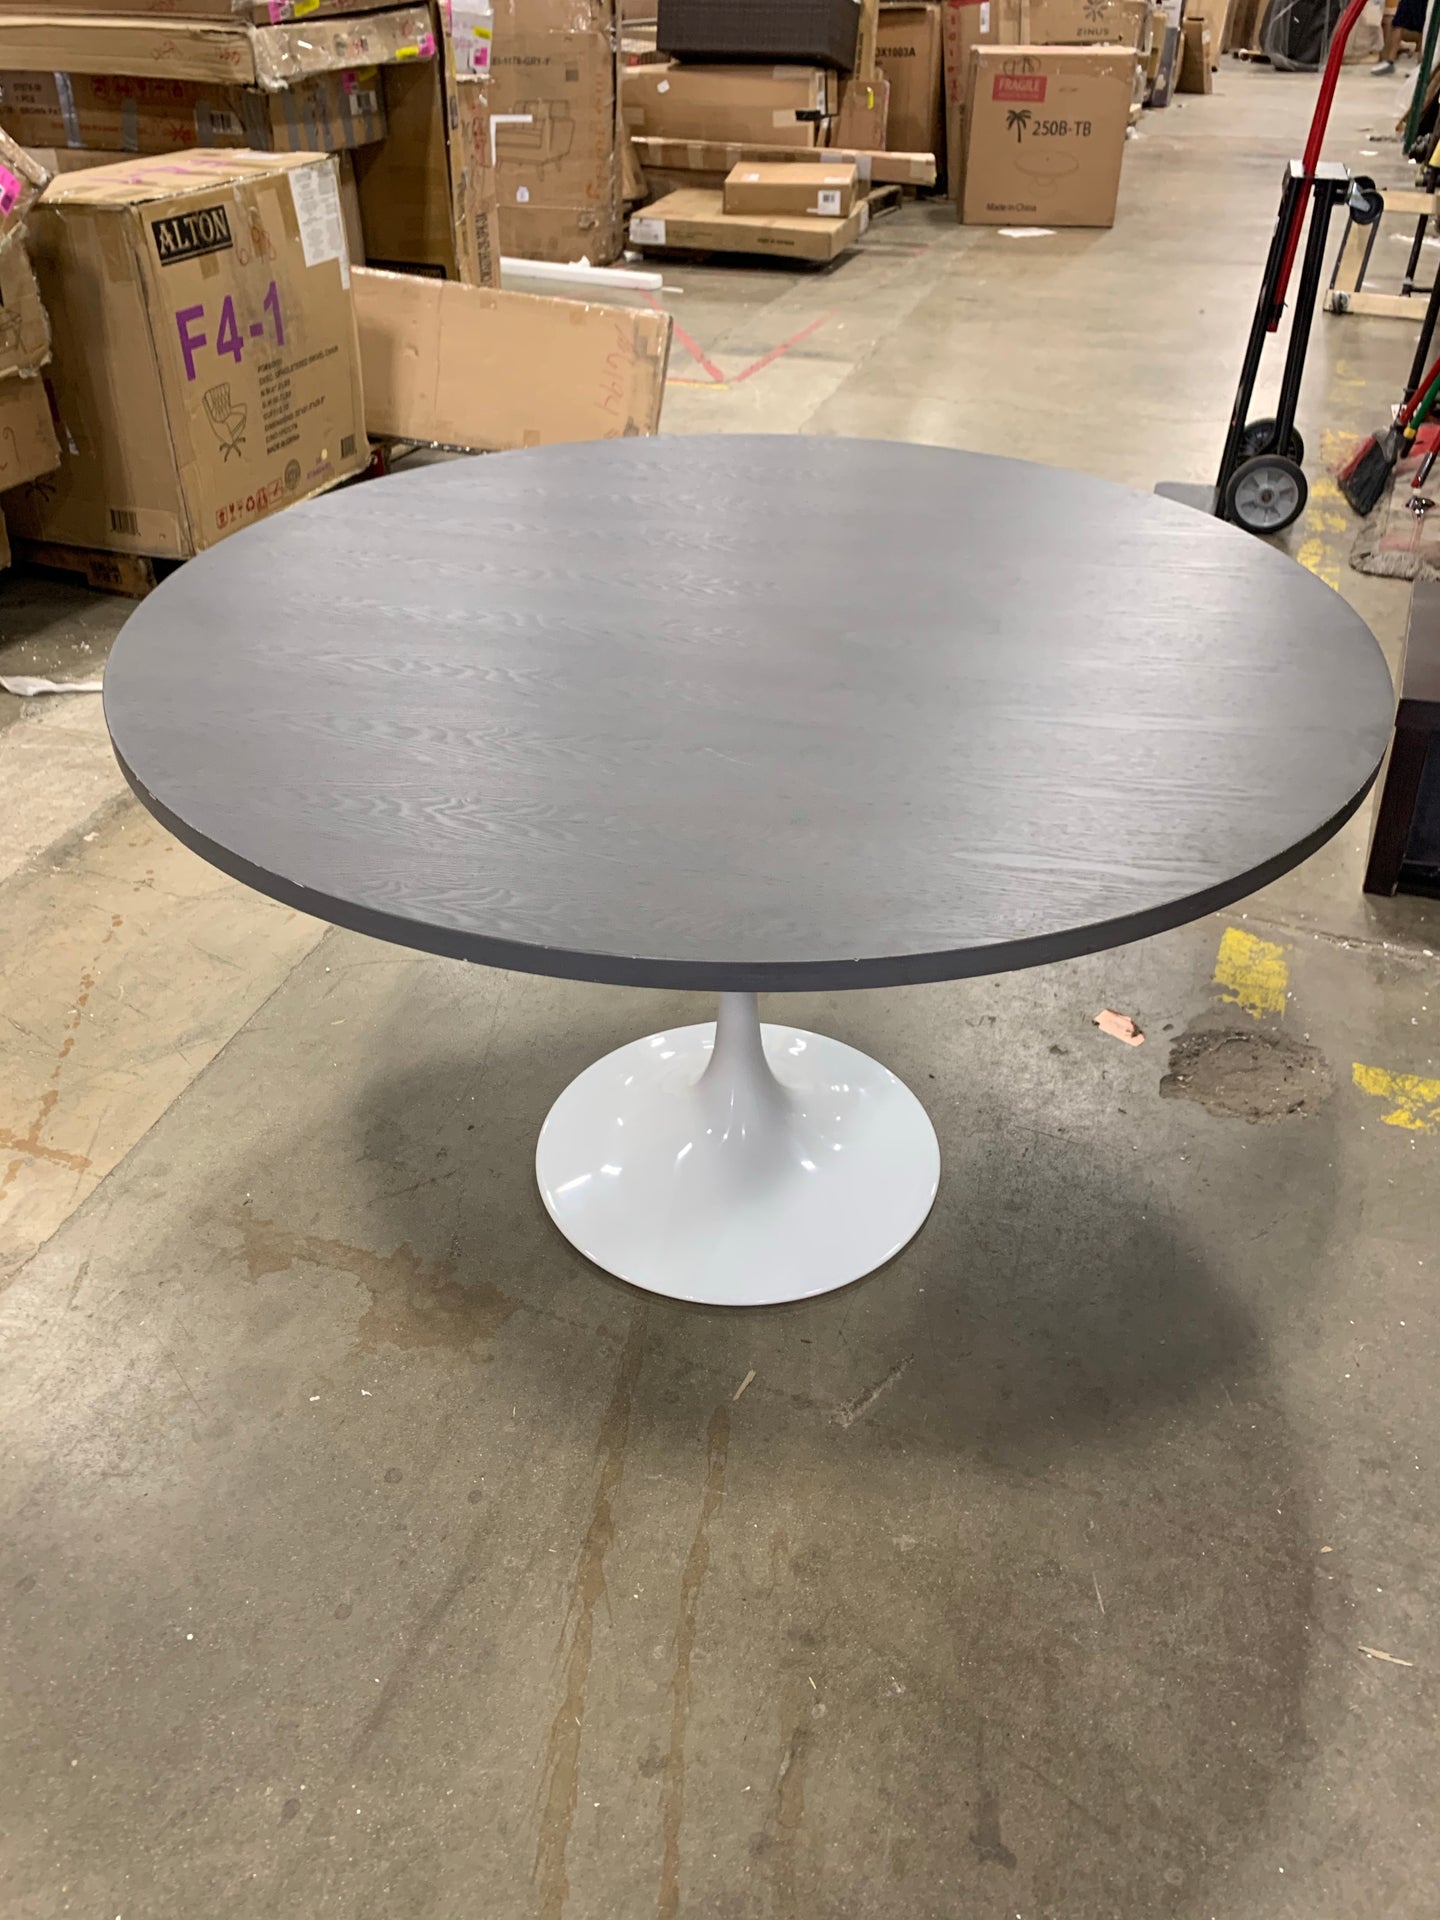 48” Round Table